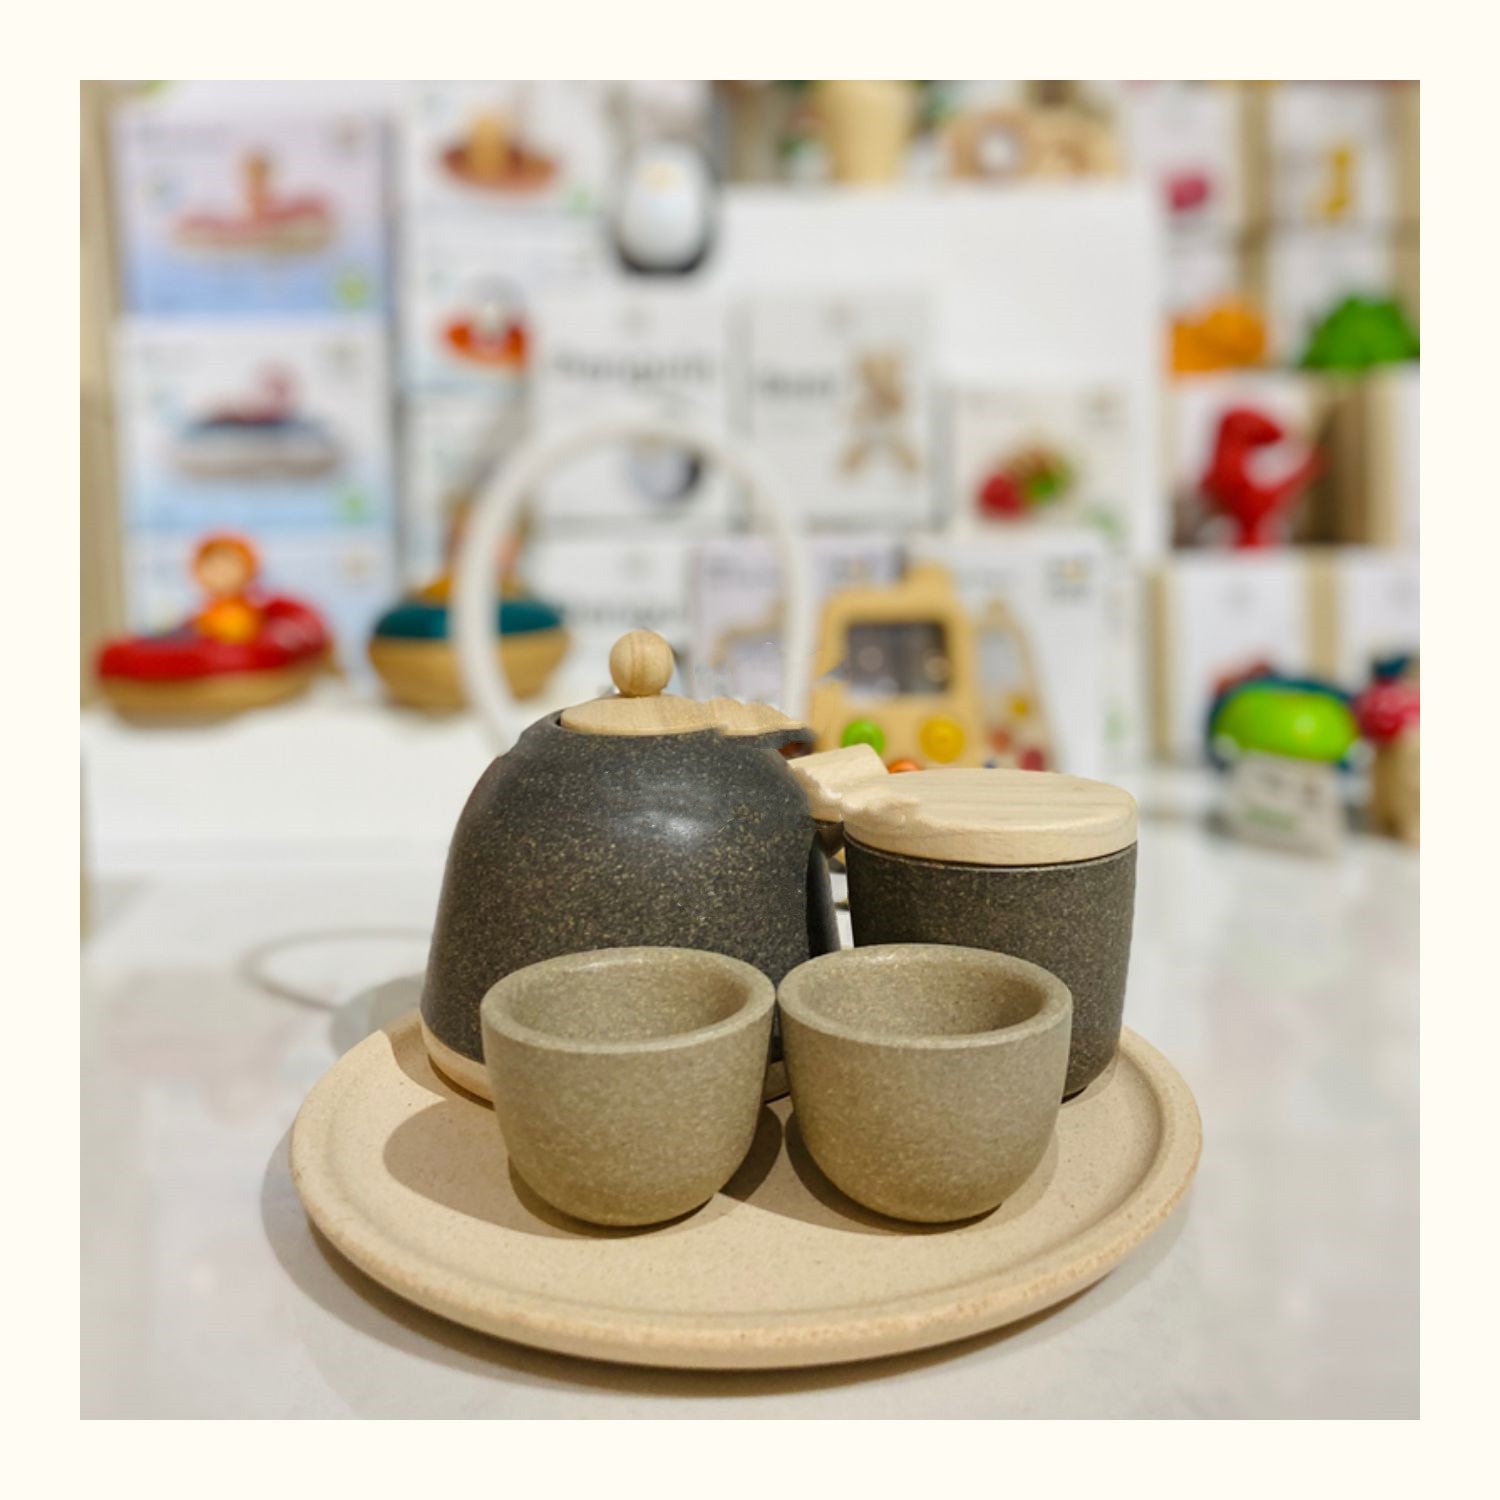 Classic Tea Set For Baby Play House